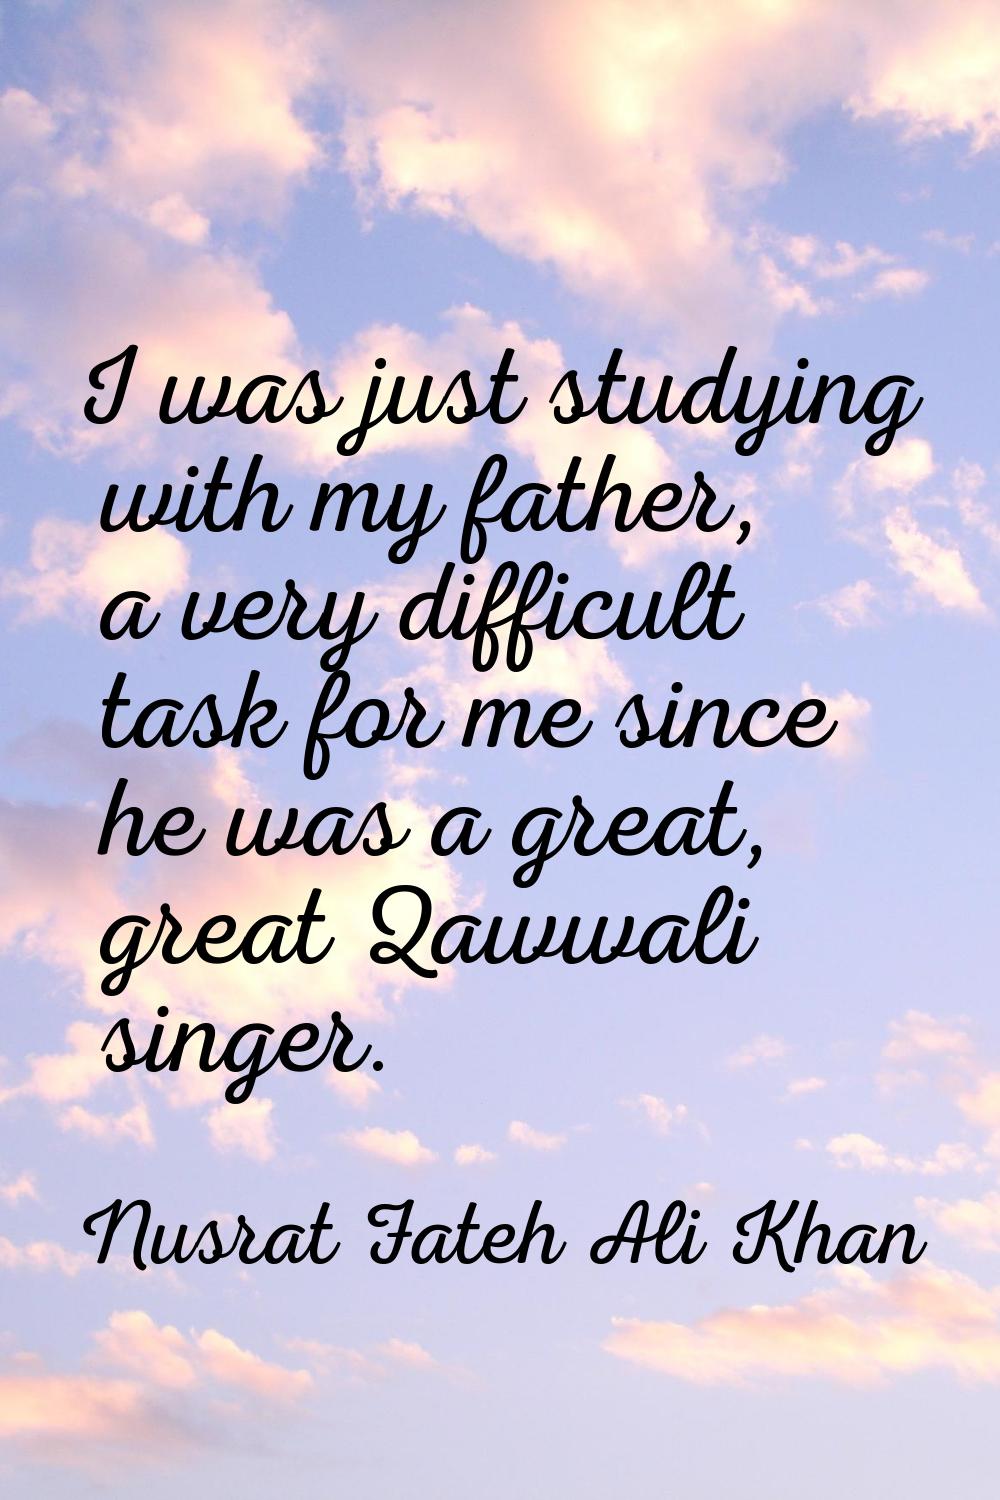 I was just studying with my father, a very difficult task for me since he was a great, great Qawwal